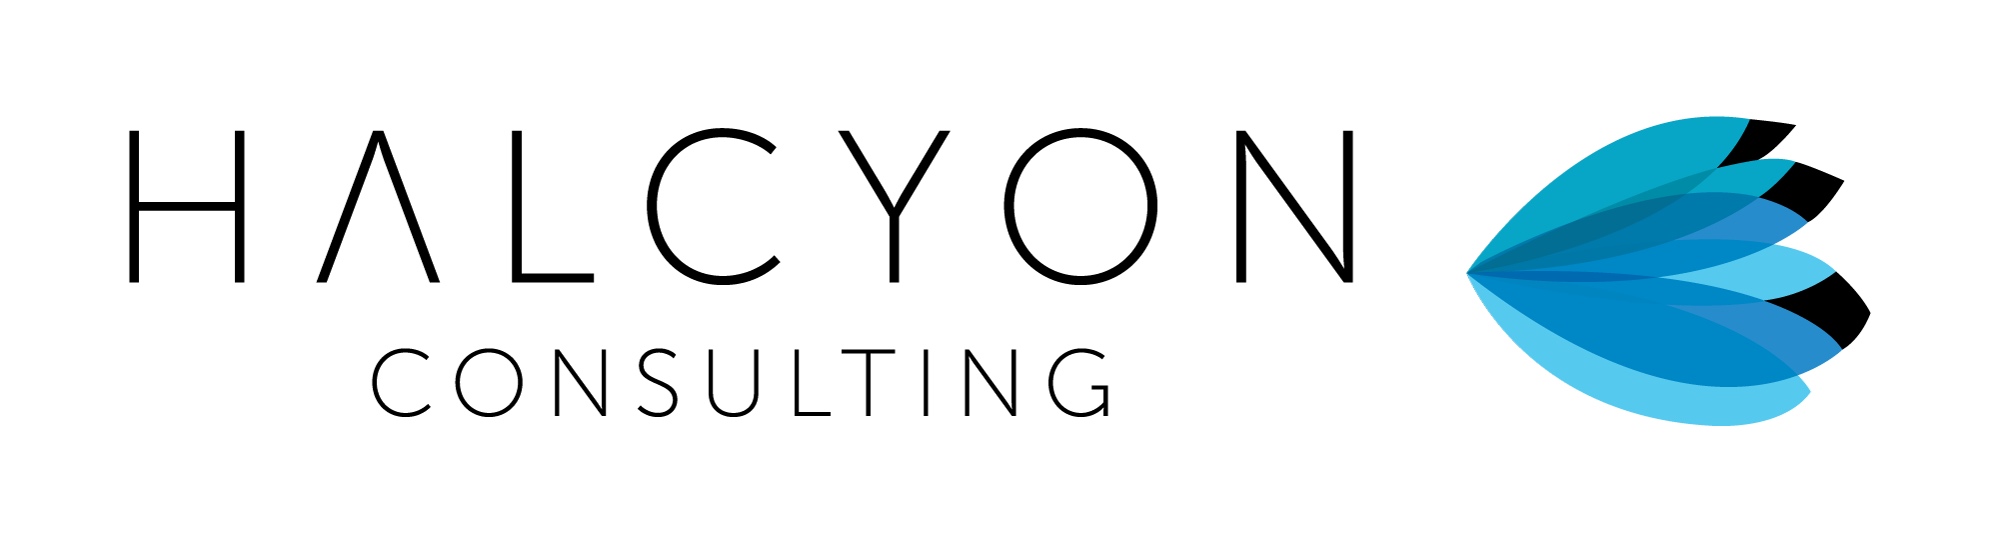 Halcyon Consulting 